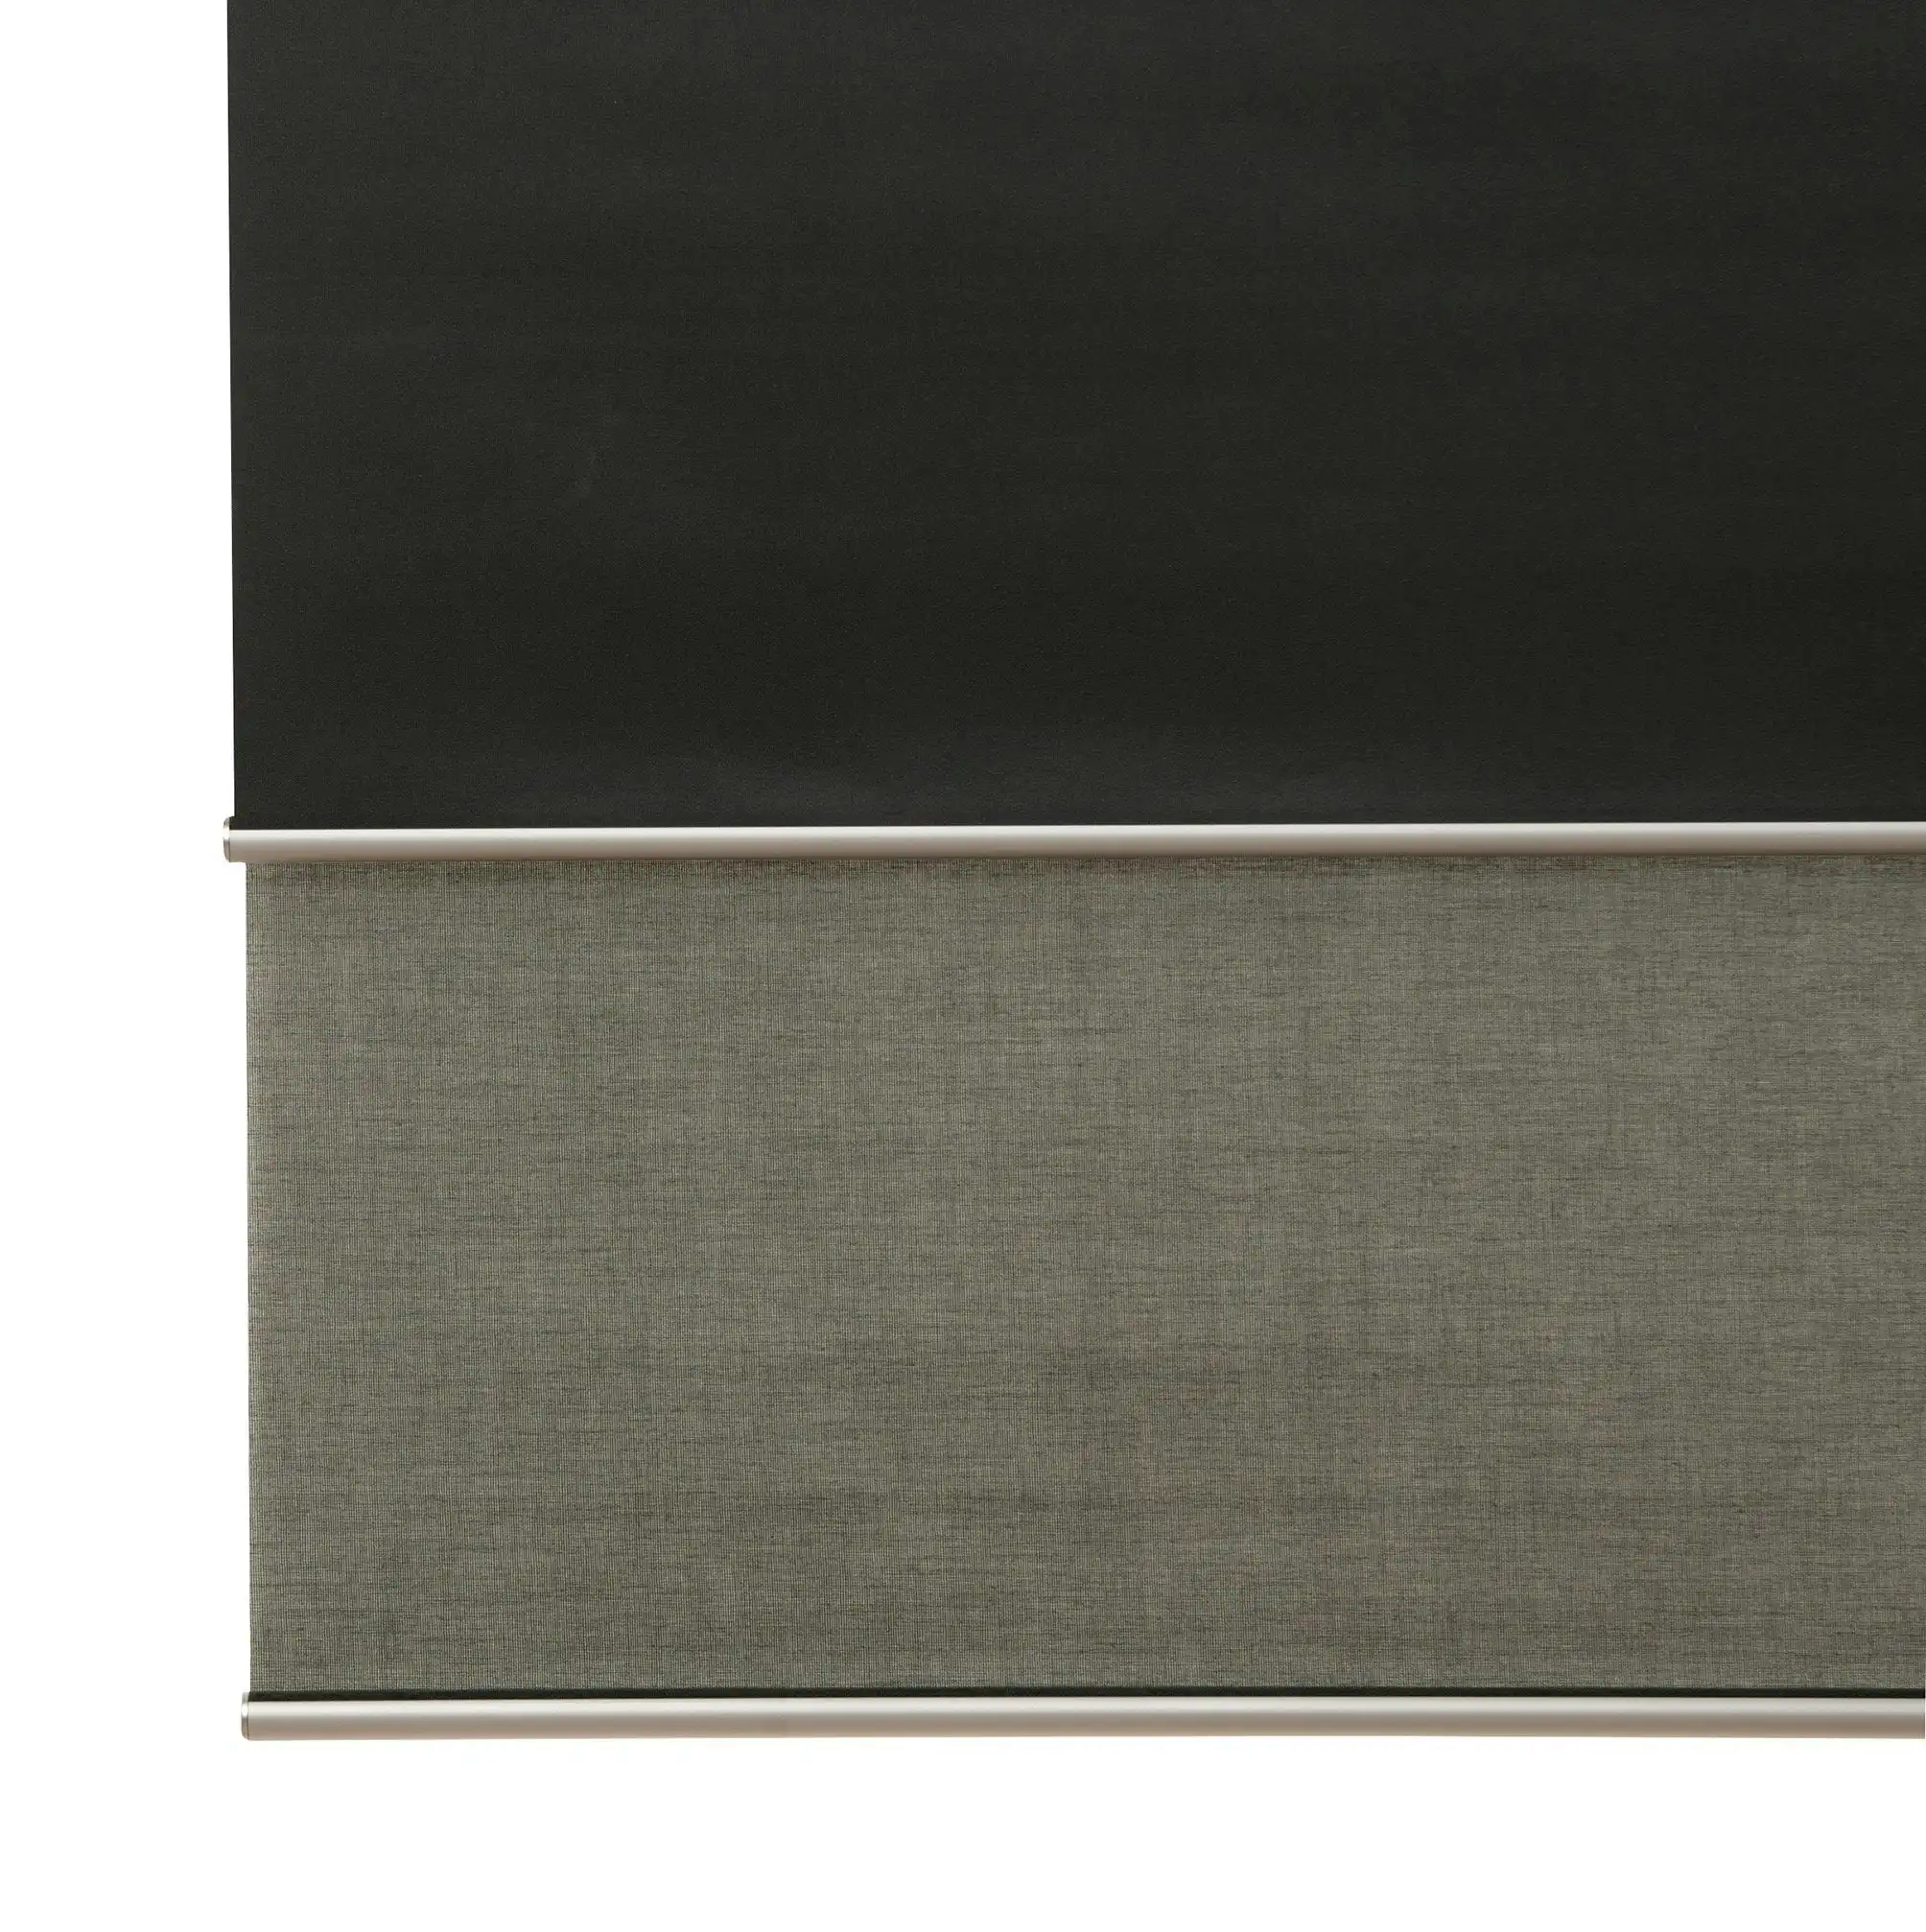 CH Day/Night Roller Blind, Charcoal